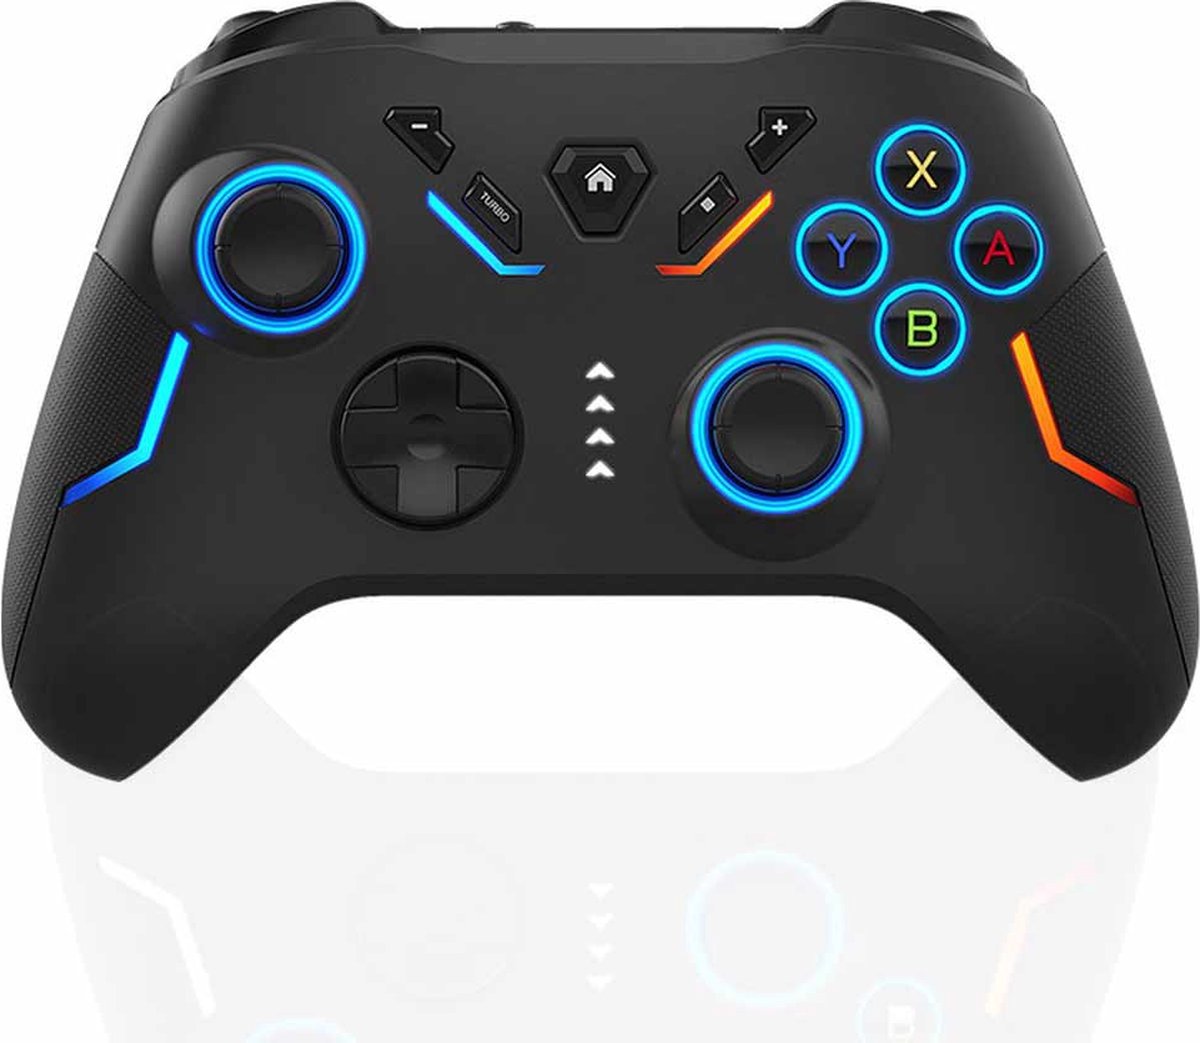 CNL Sight Pro Controller Draadloos-RGB Verlichting- Nintendo Switch Controller Compatibel met Switch/Switch Lite/Switch OLED/IOS/Android/Windows,- Wireless Switch Pro Controller met LED-kleurlicht/Dual shock/Turbo/Motion Control